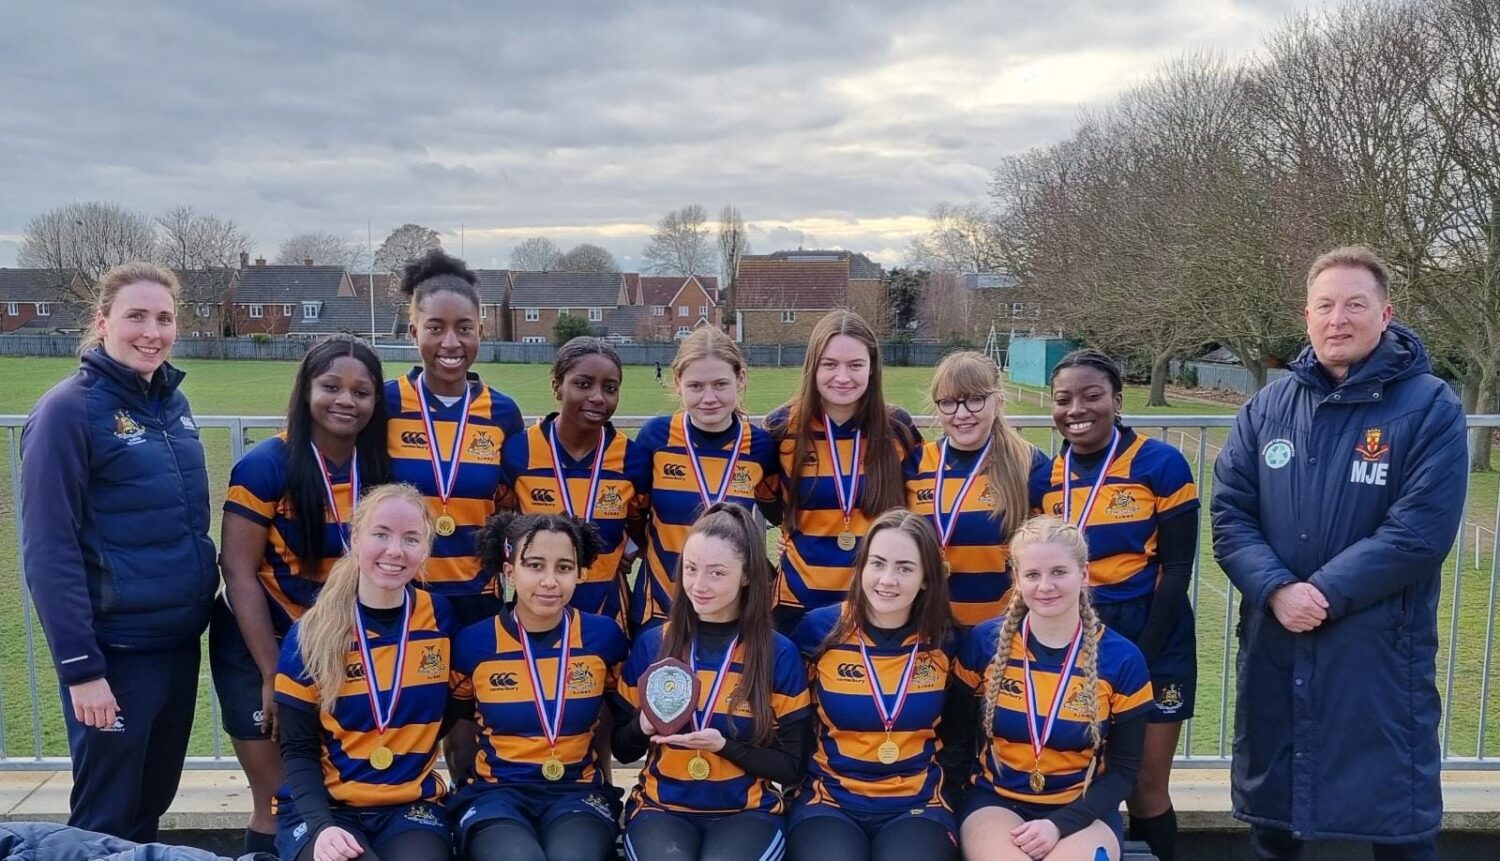 Participants in a Girls Rugby Tournament are seen posing together for a group photo, alongside their coaches, wearing gold medals around their necks.